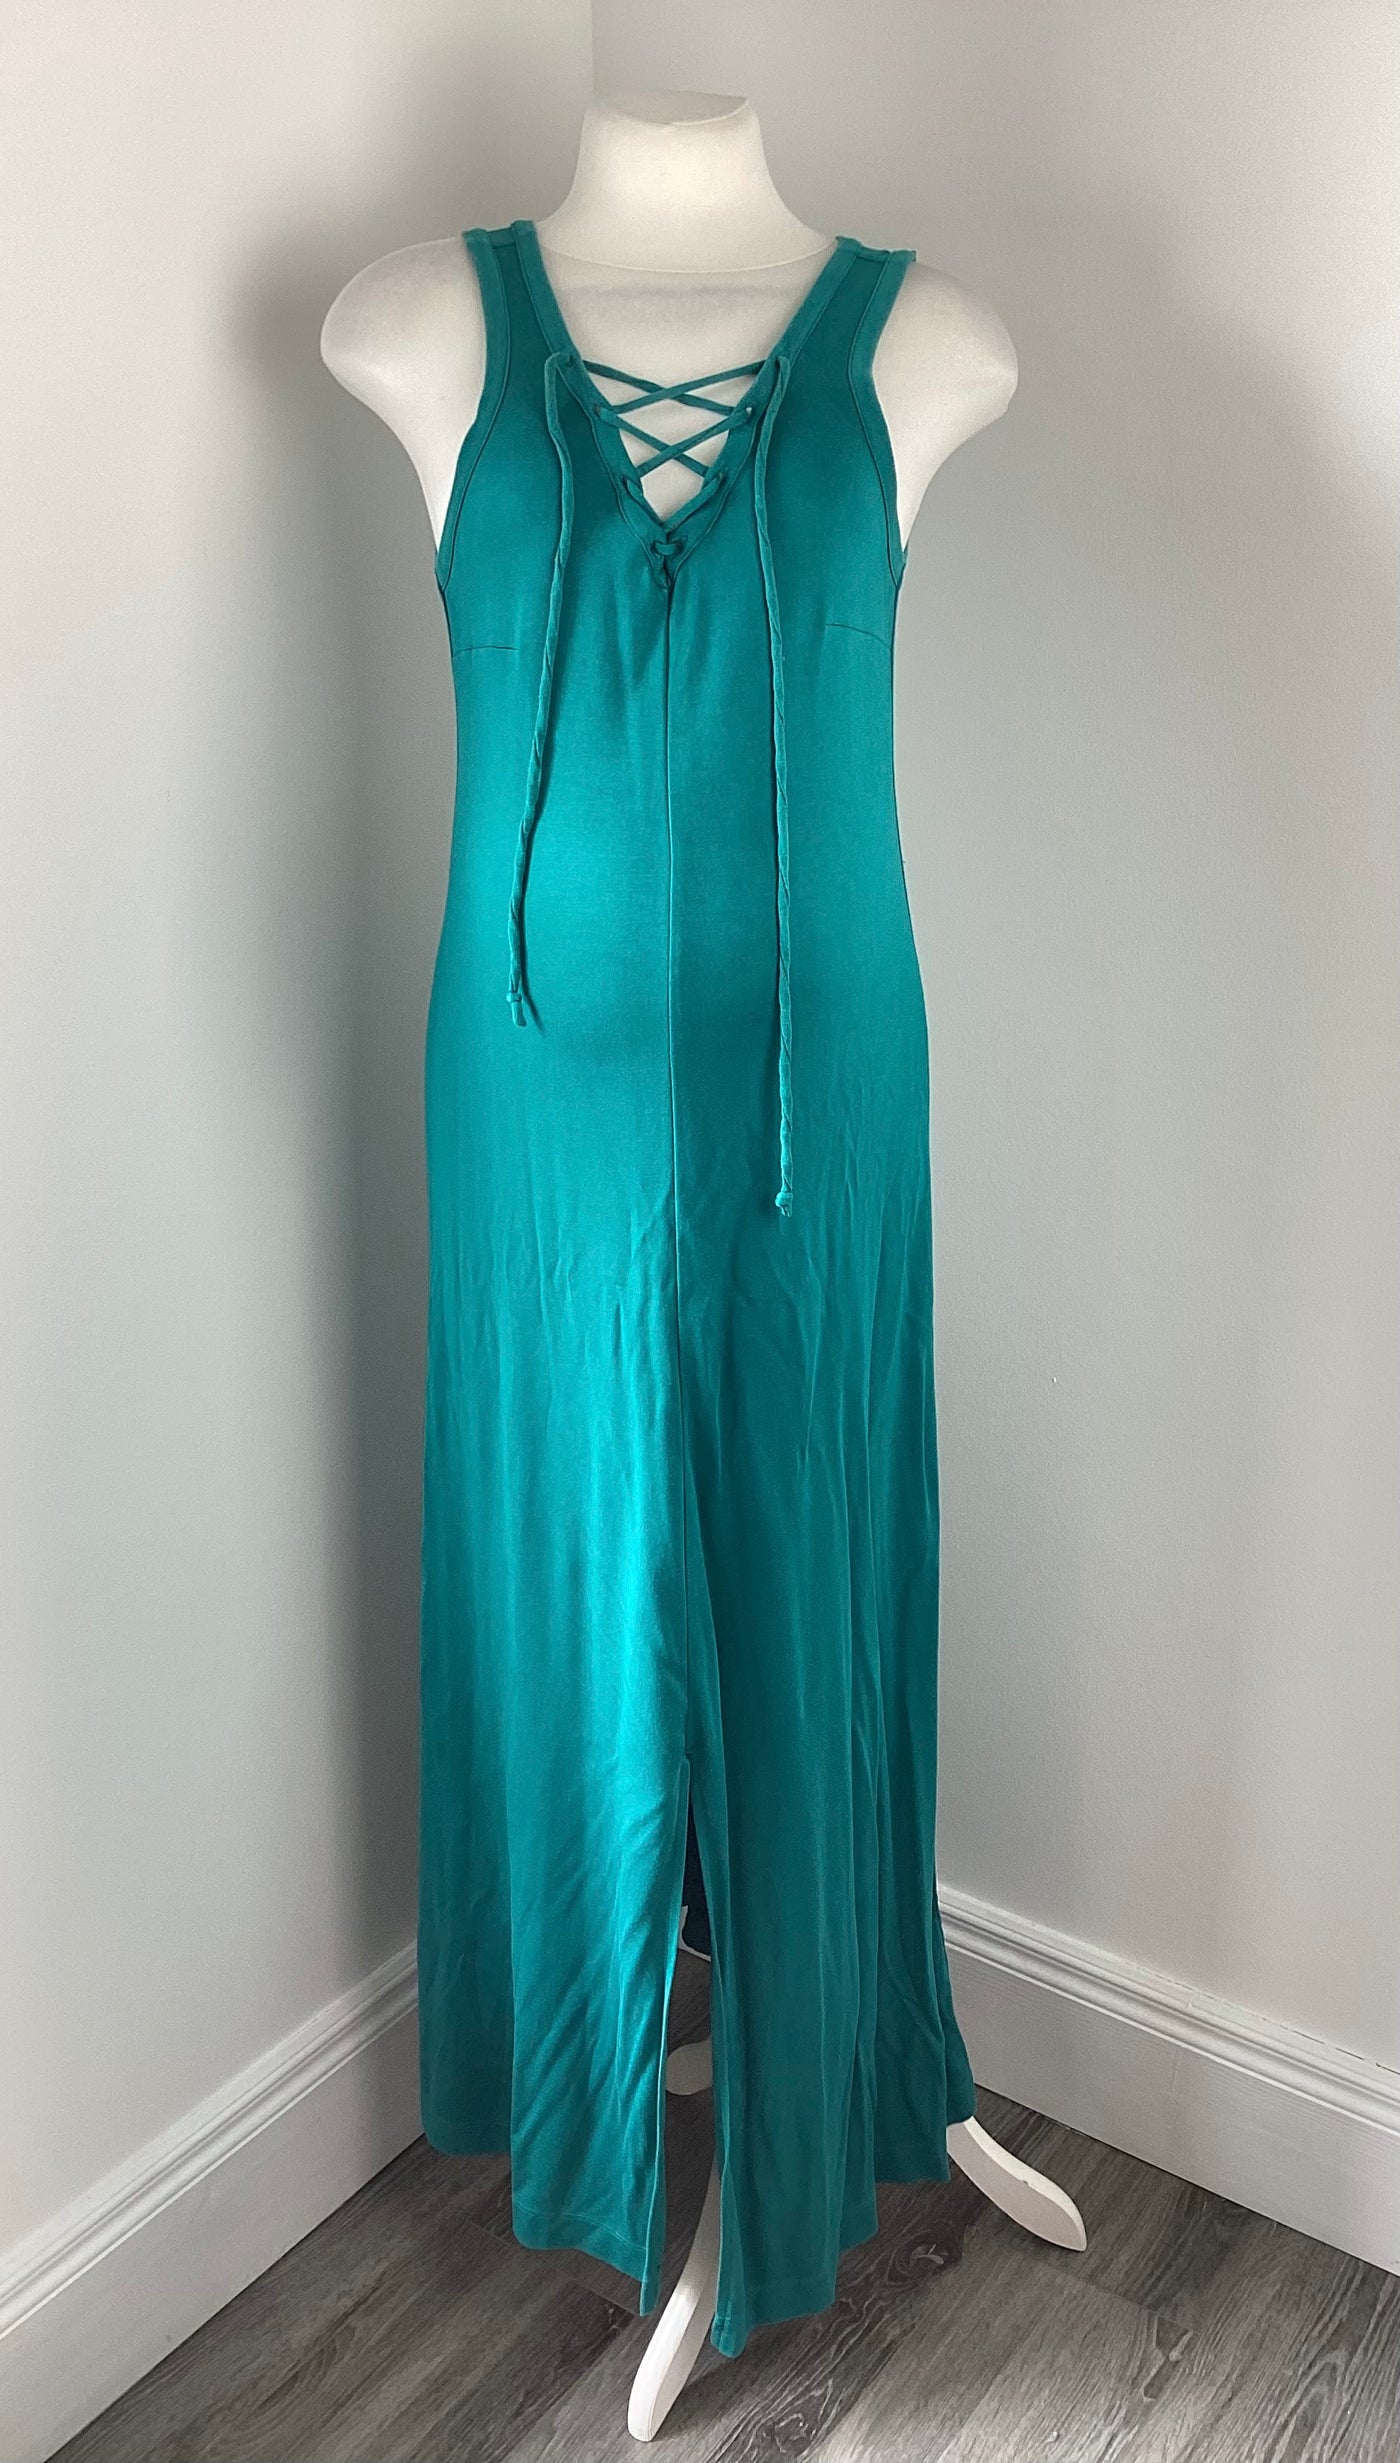 H&M Mama green sleeveless maxi dress with tie front - Size L (Approx UK 12)